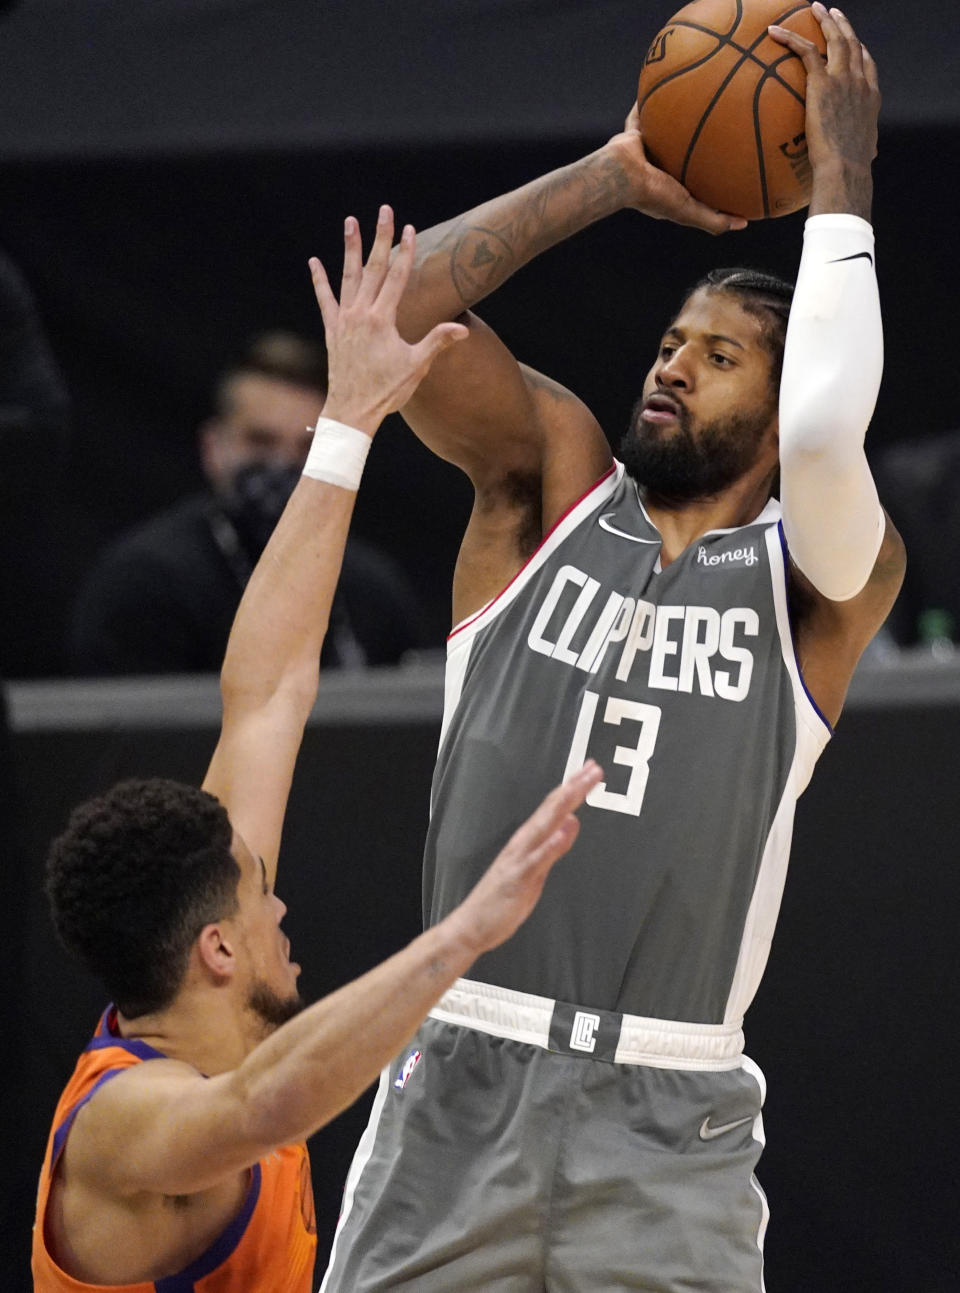 Los Angeles Clippers guard Paul George, right, shoots as Phoenix Suns guard Devin Booker defends during the second half in Game 4 of the NBA basketball Western Conference Finals Saturday, June 26, 2021, in Los Angeles. (AP Photo/Mark J. Terrill)